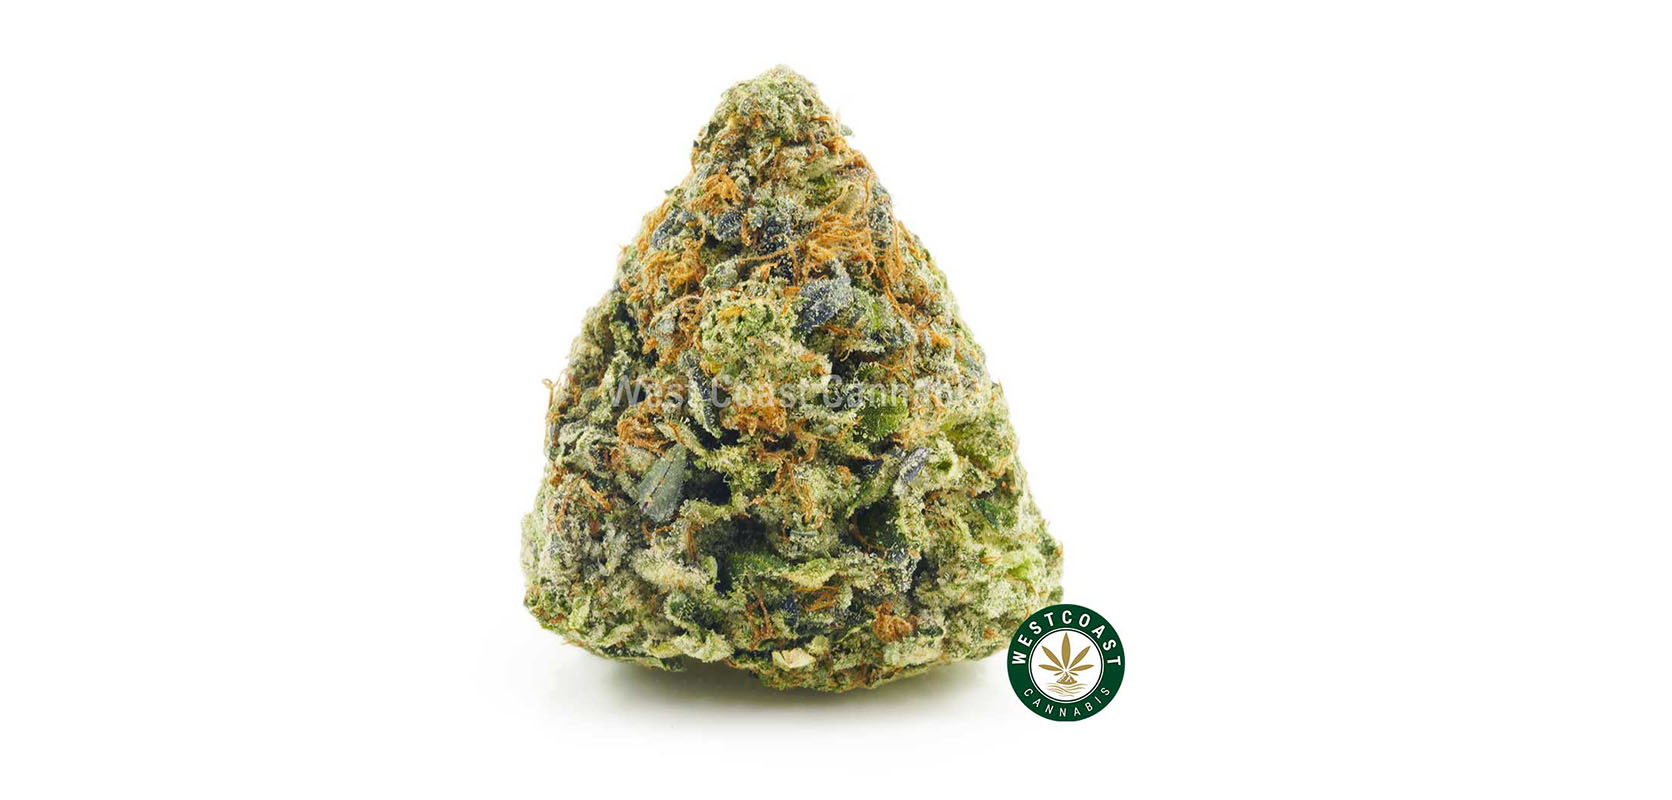 buy weed online in canada AAAA Do Si Dos strain buds from the top online dispensary for mail order weed in Canada. Buy weed online.